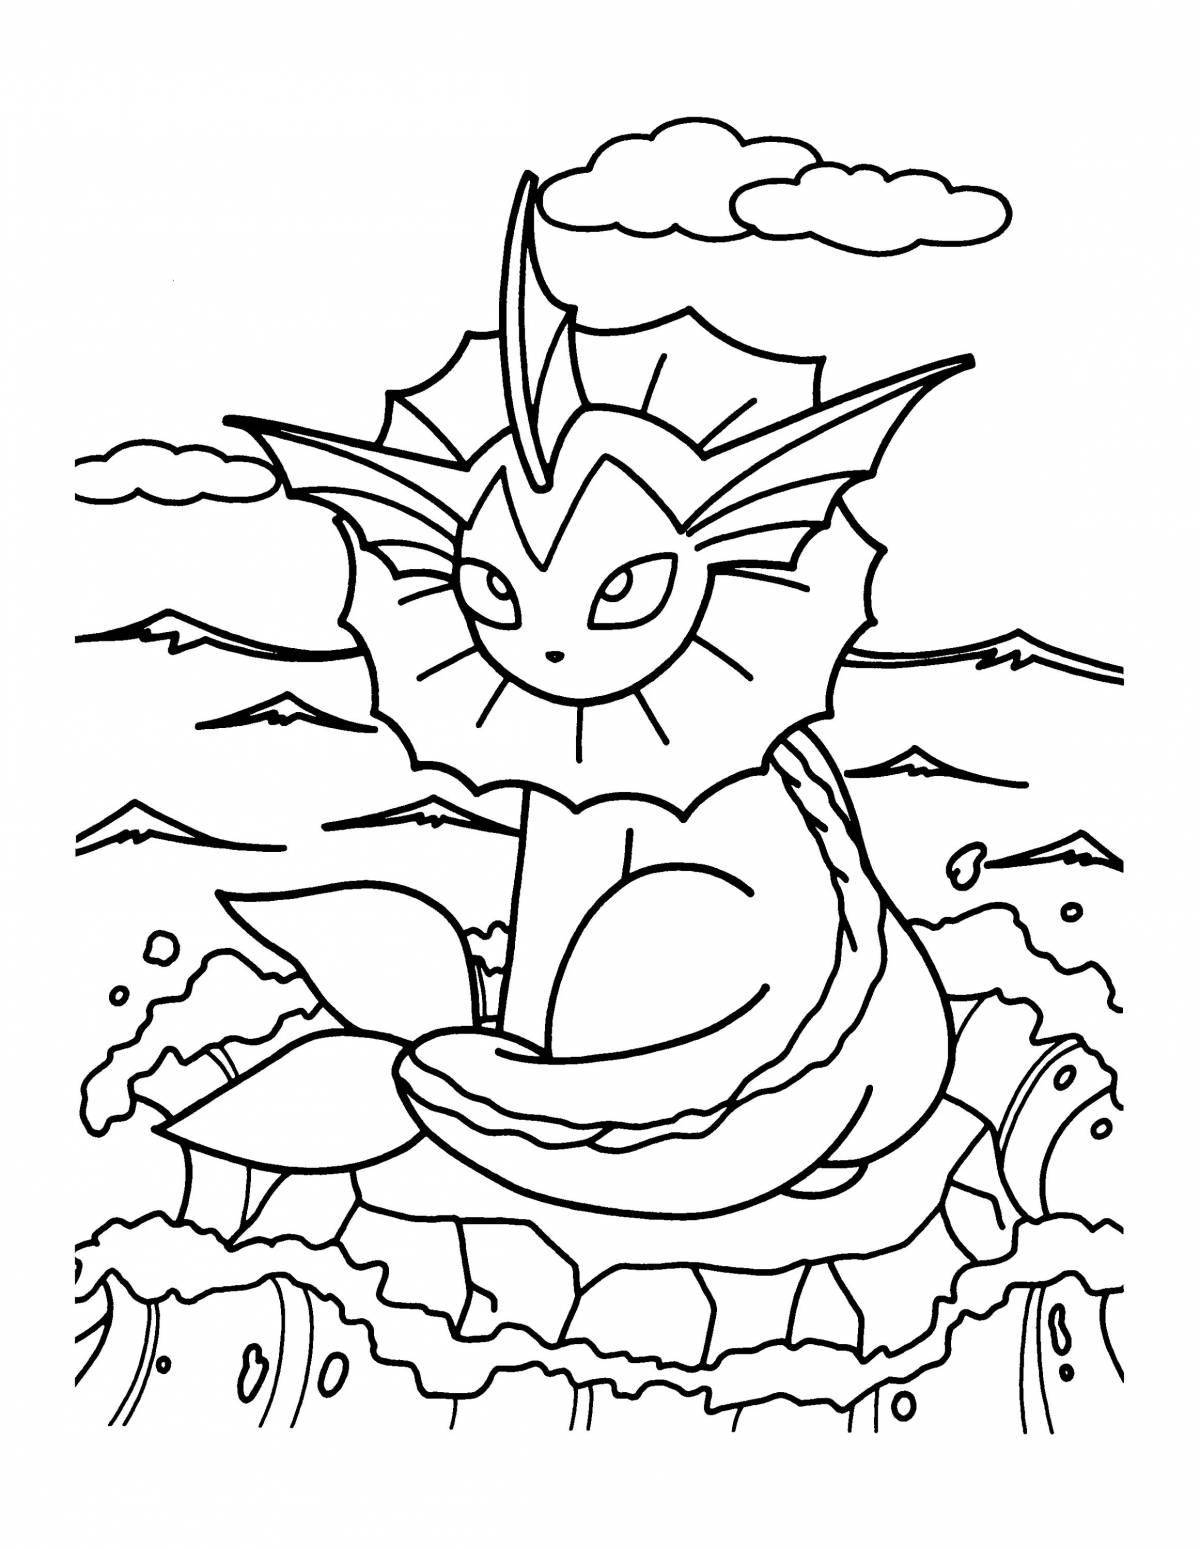 Good quality playful pokemon coloring page